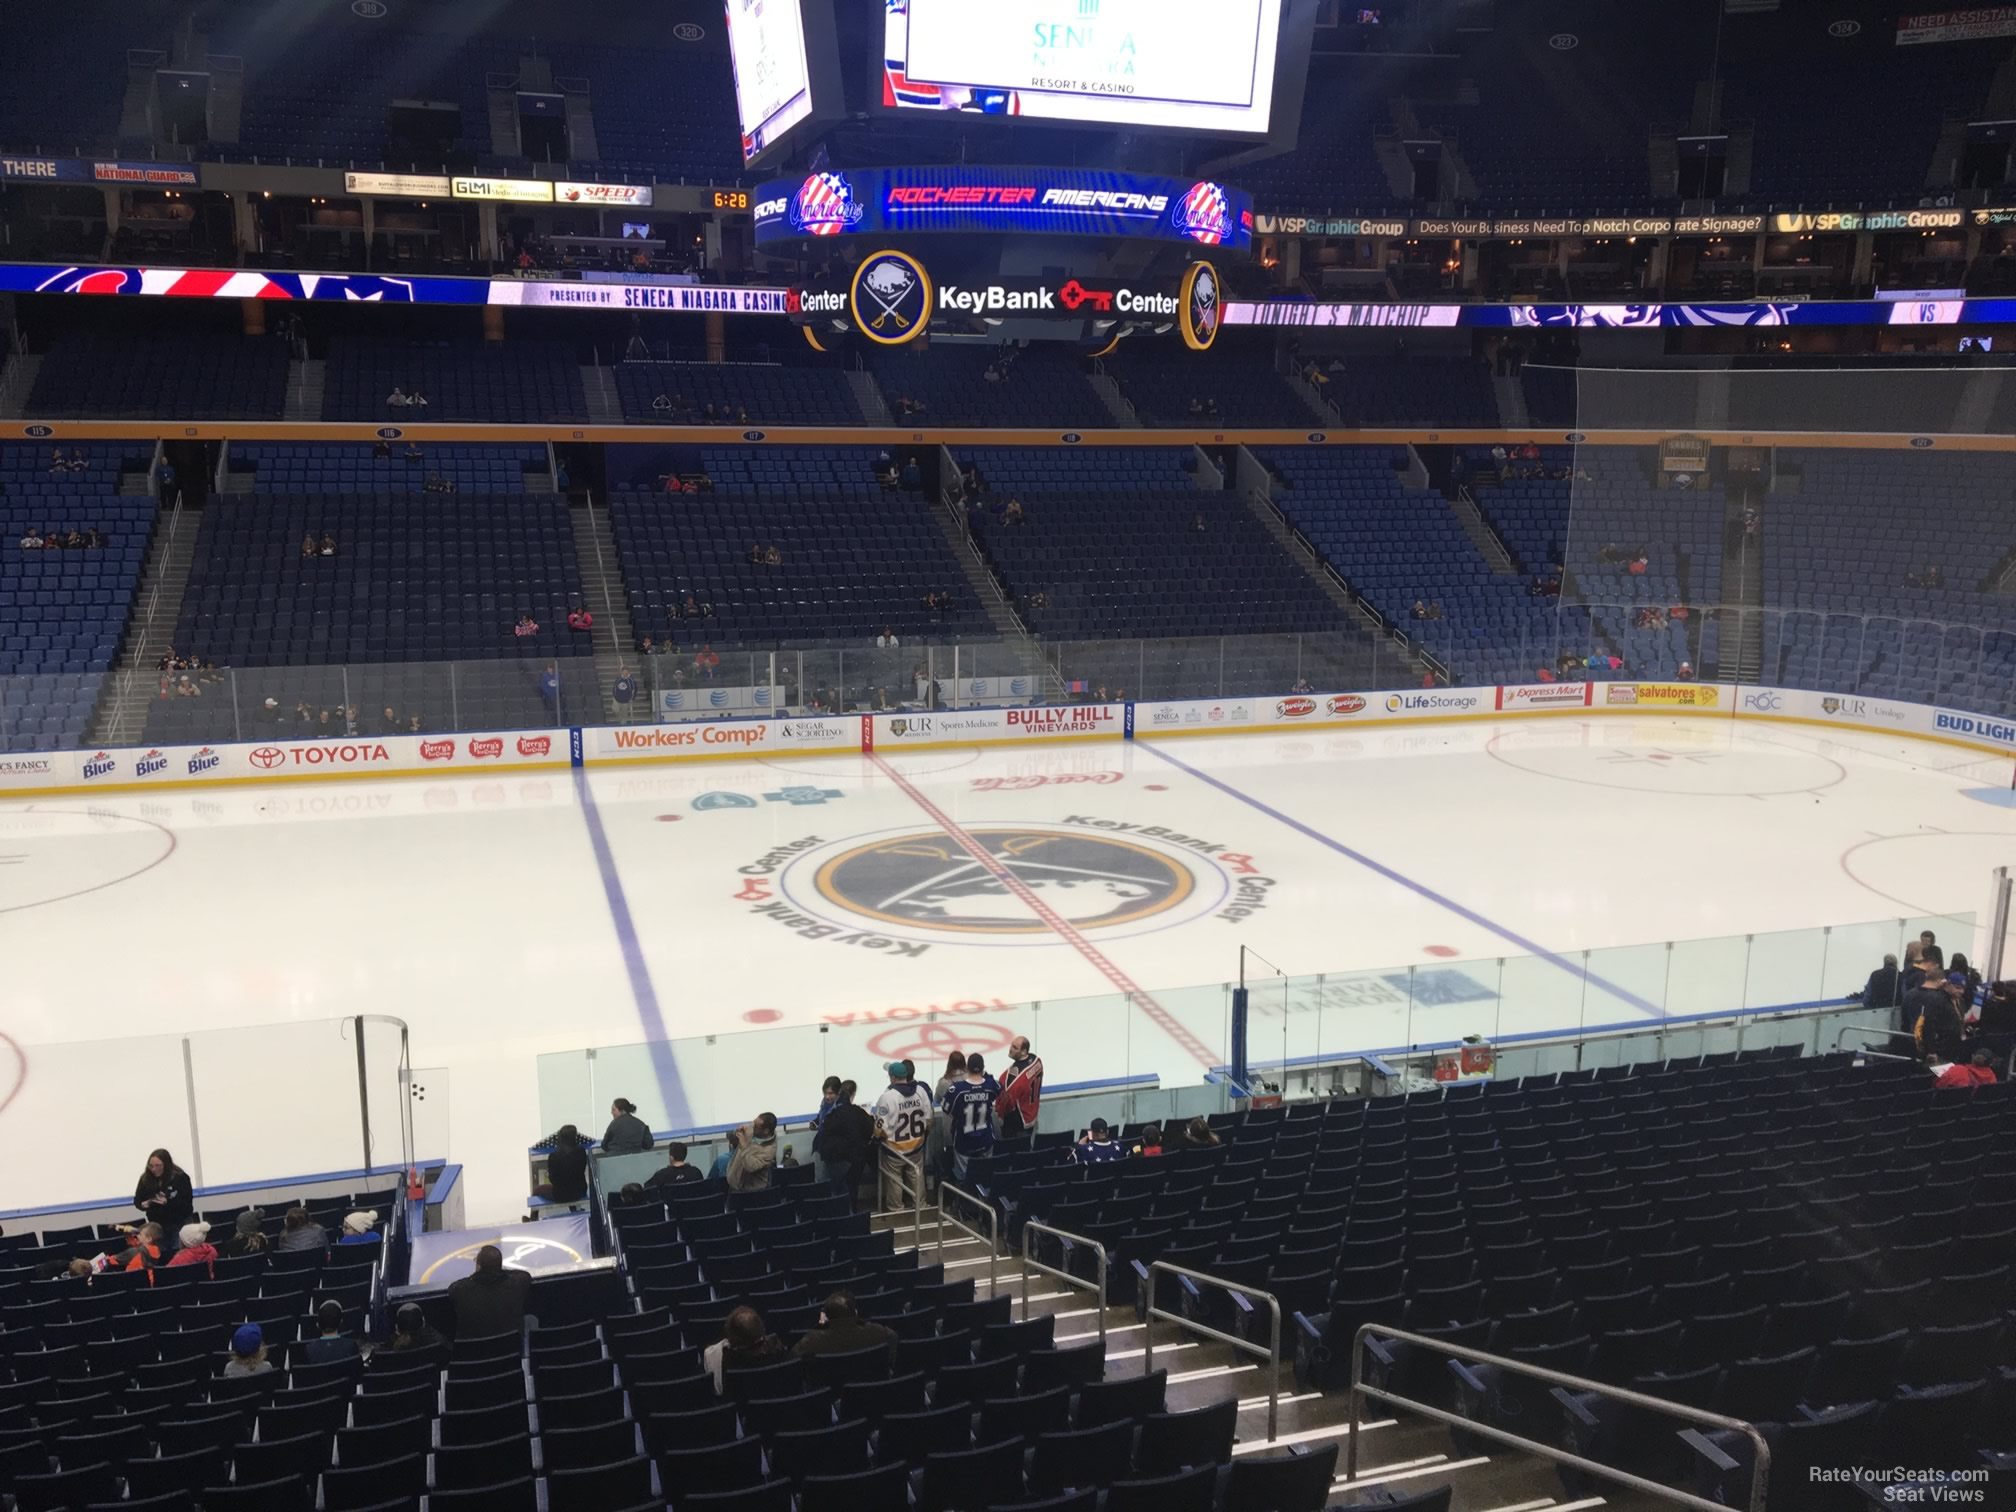 Section 208 at KeyBank Center - RateYourSeats.com